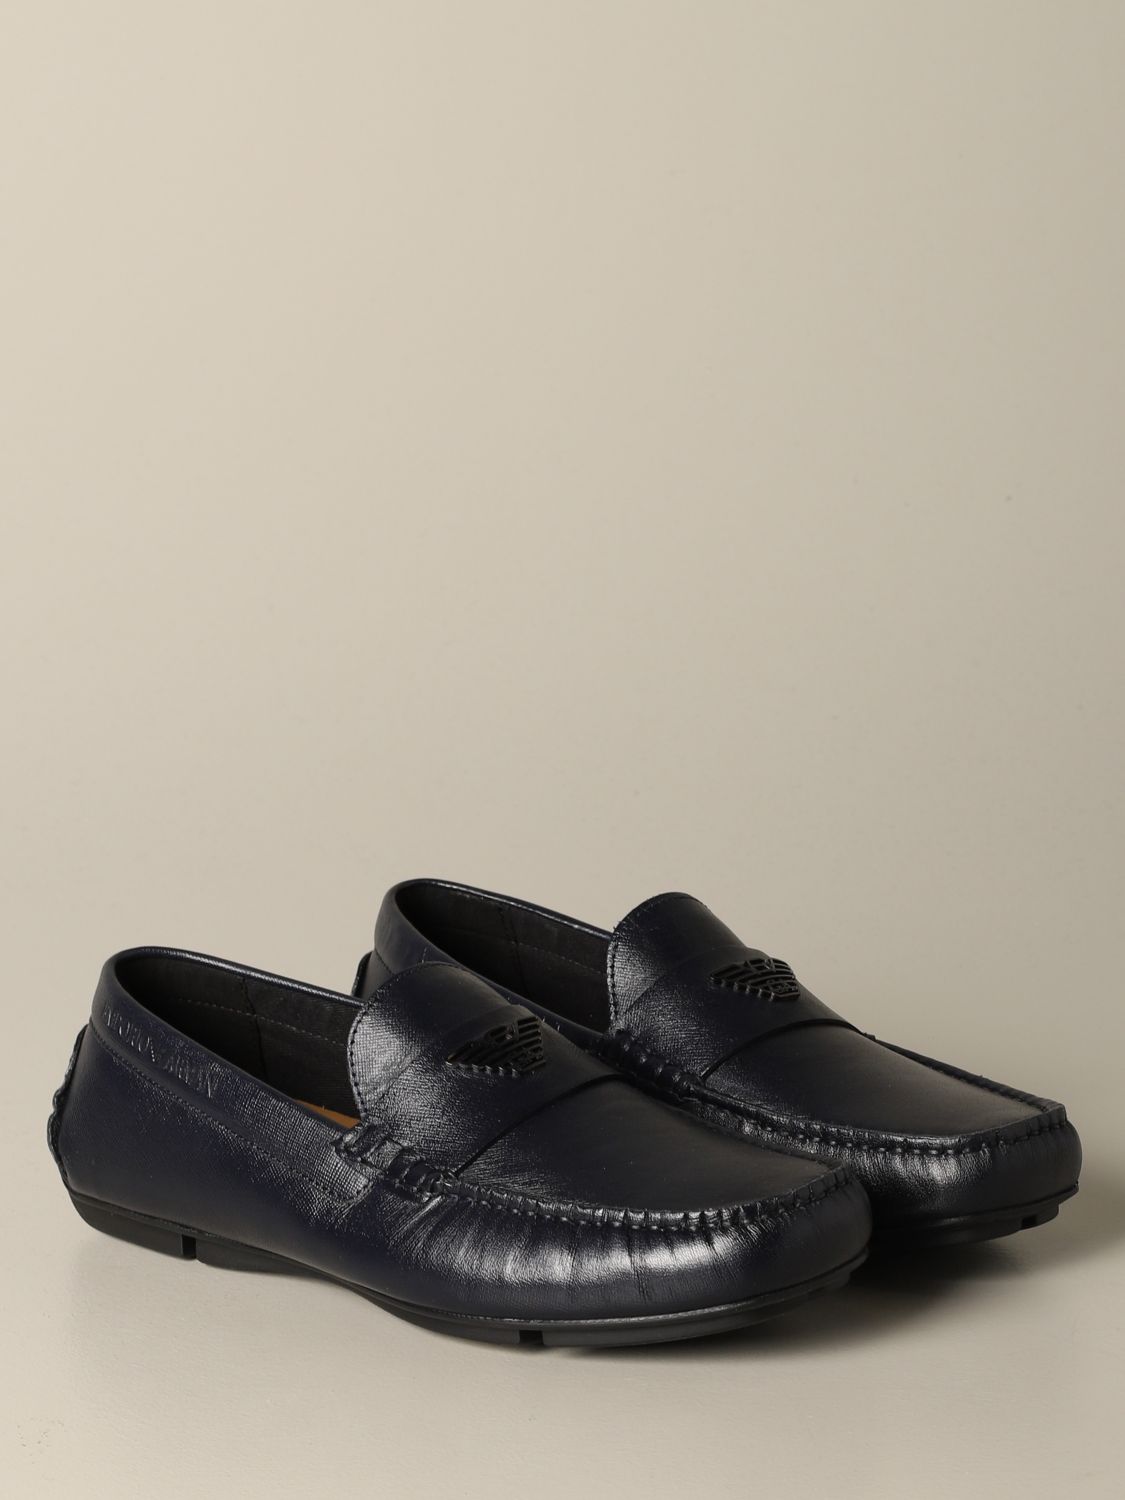 Emporio Armani Drive loafer in leather with logo | Loafers Emporio ...